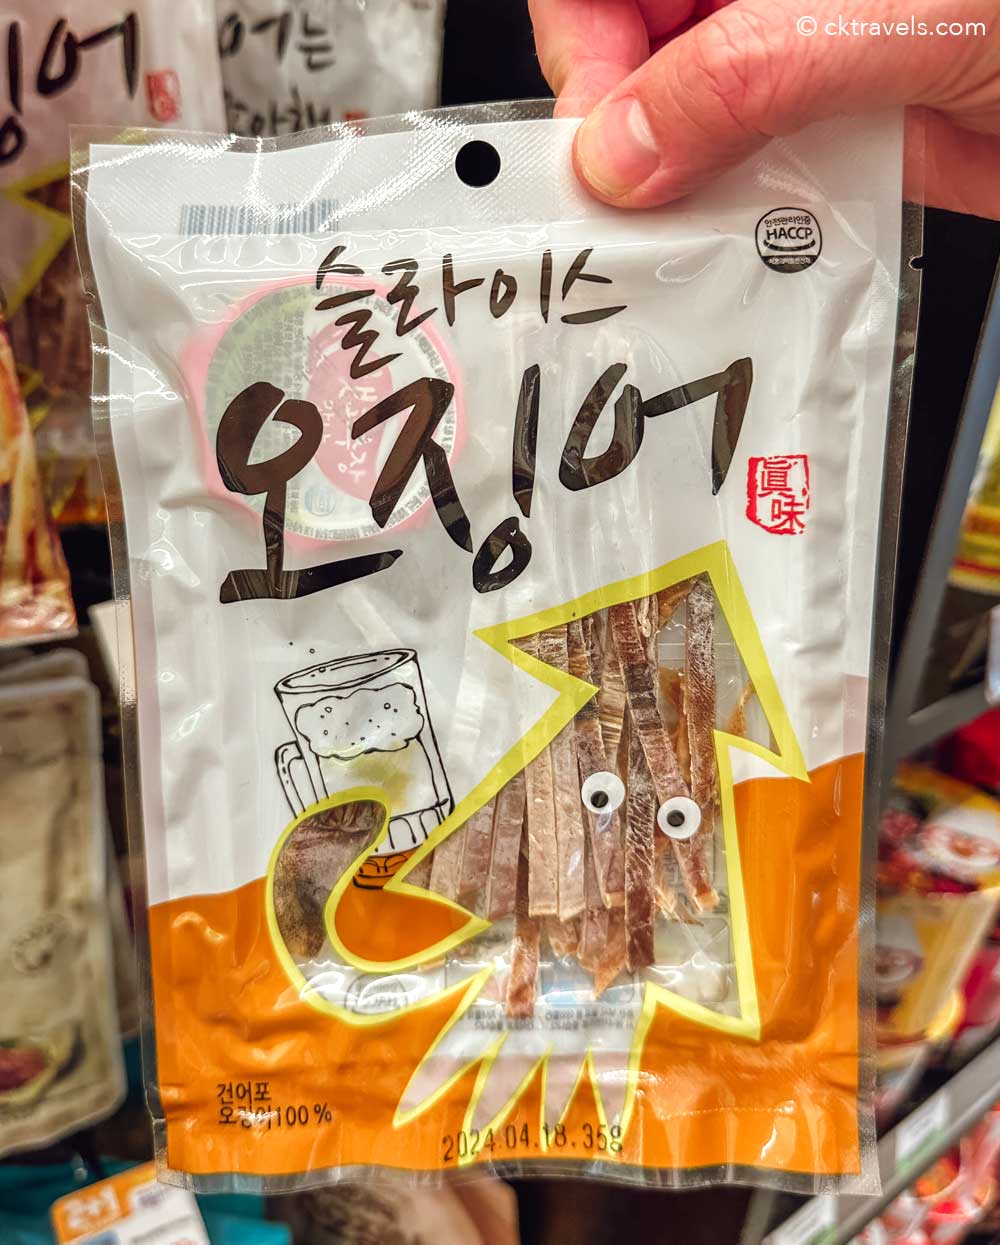 dried squid snack from CU convenience stores in South Korea